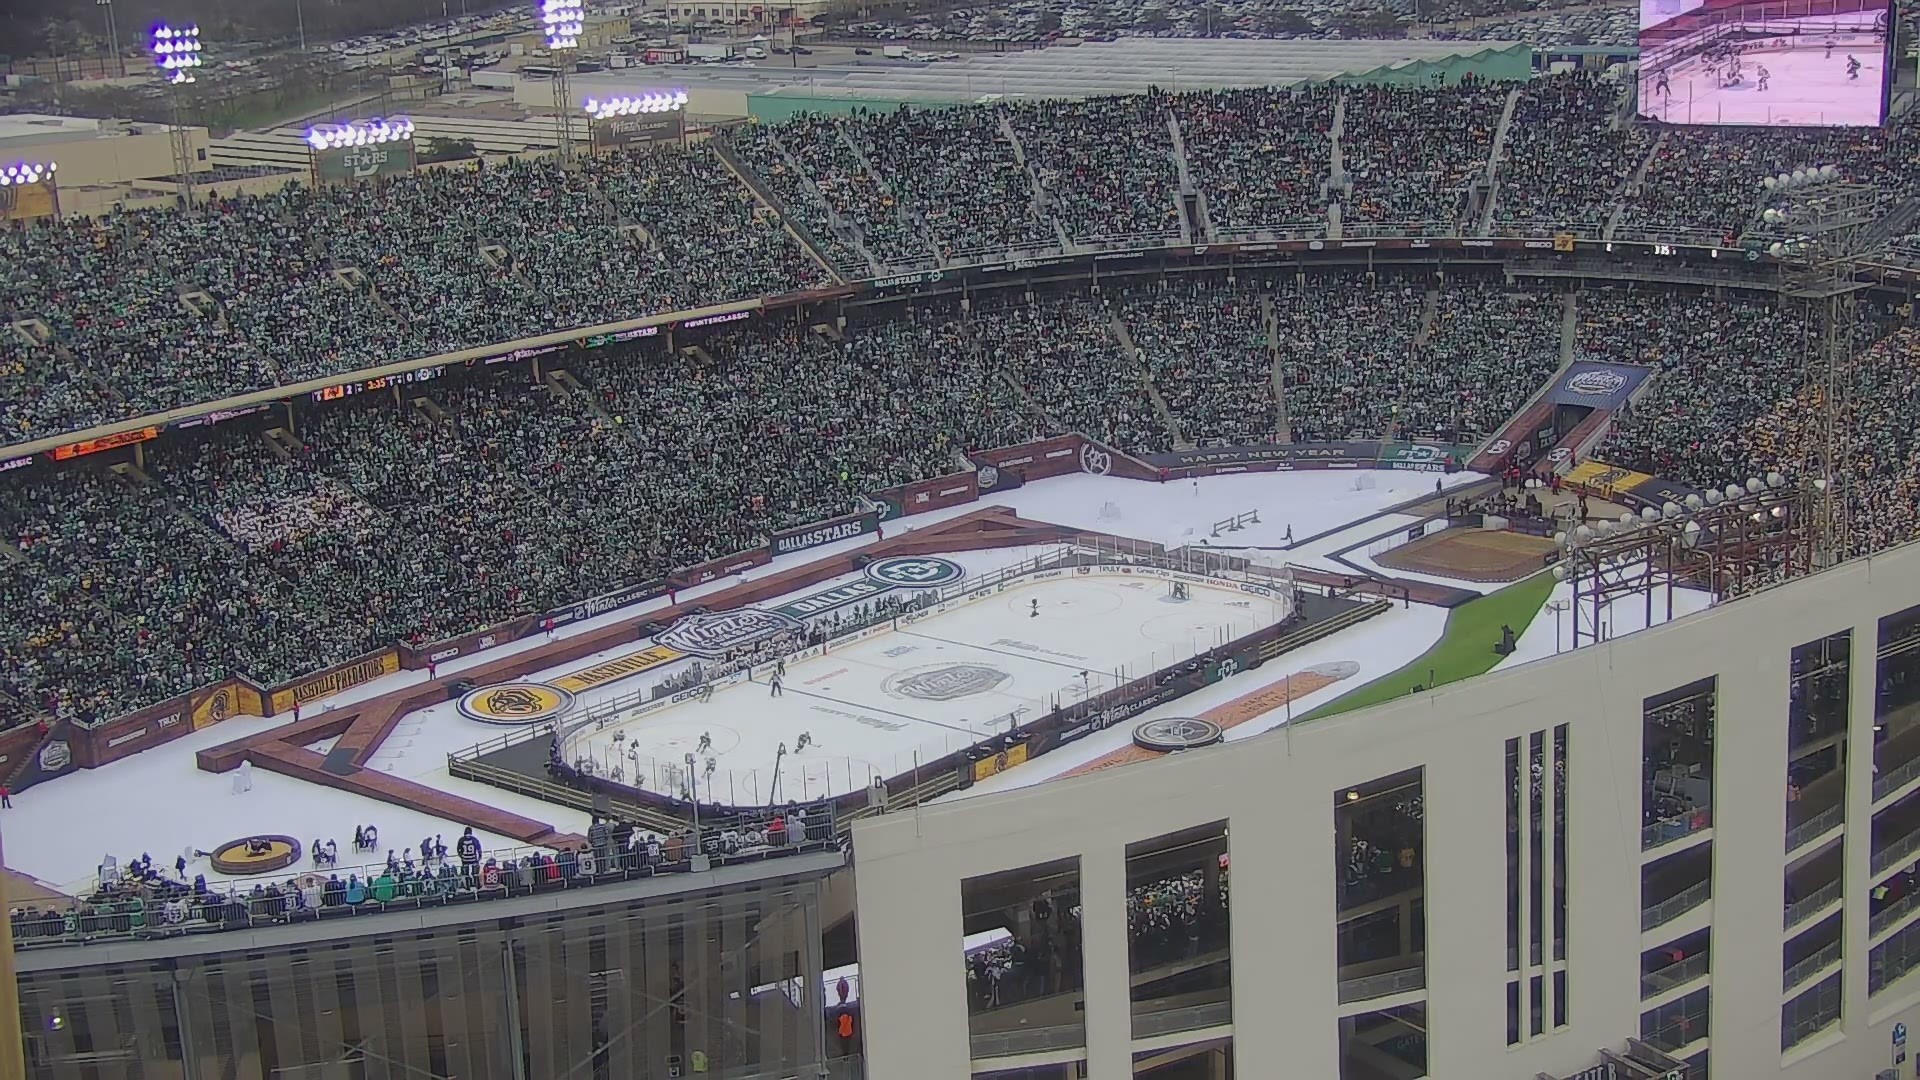 Dallas Stars Announced As Hosts Of 2020 NHL Winter Classic